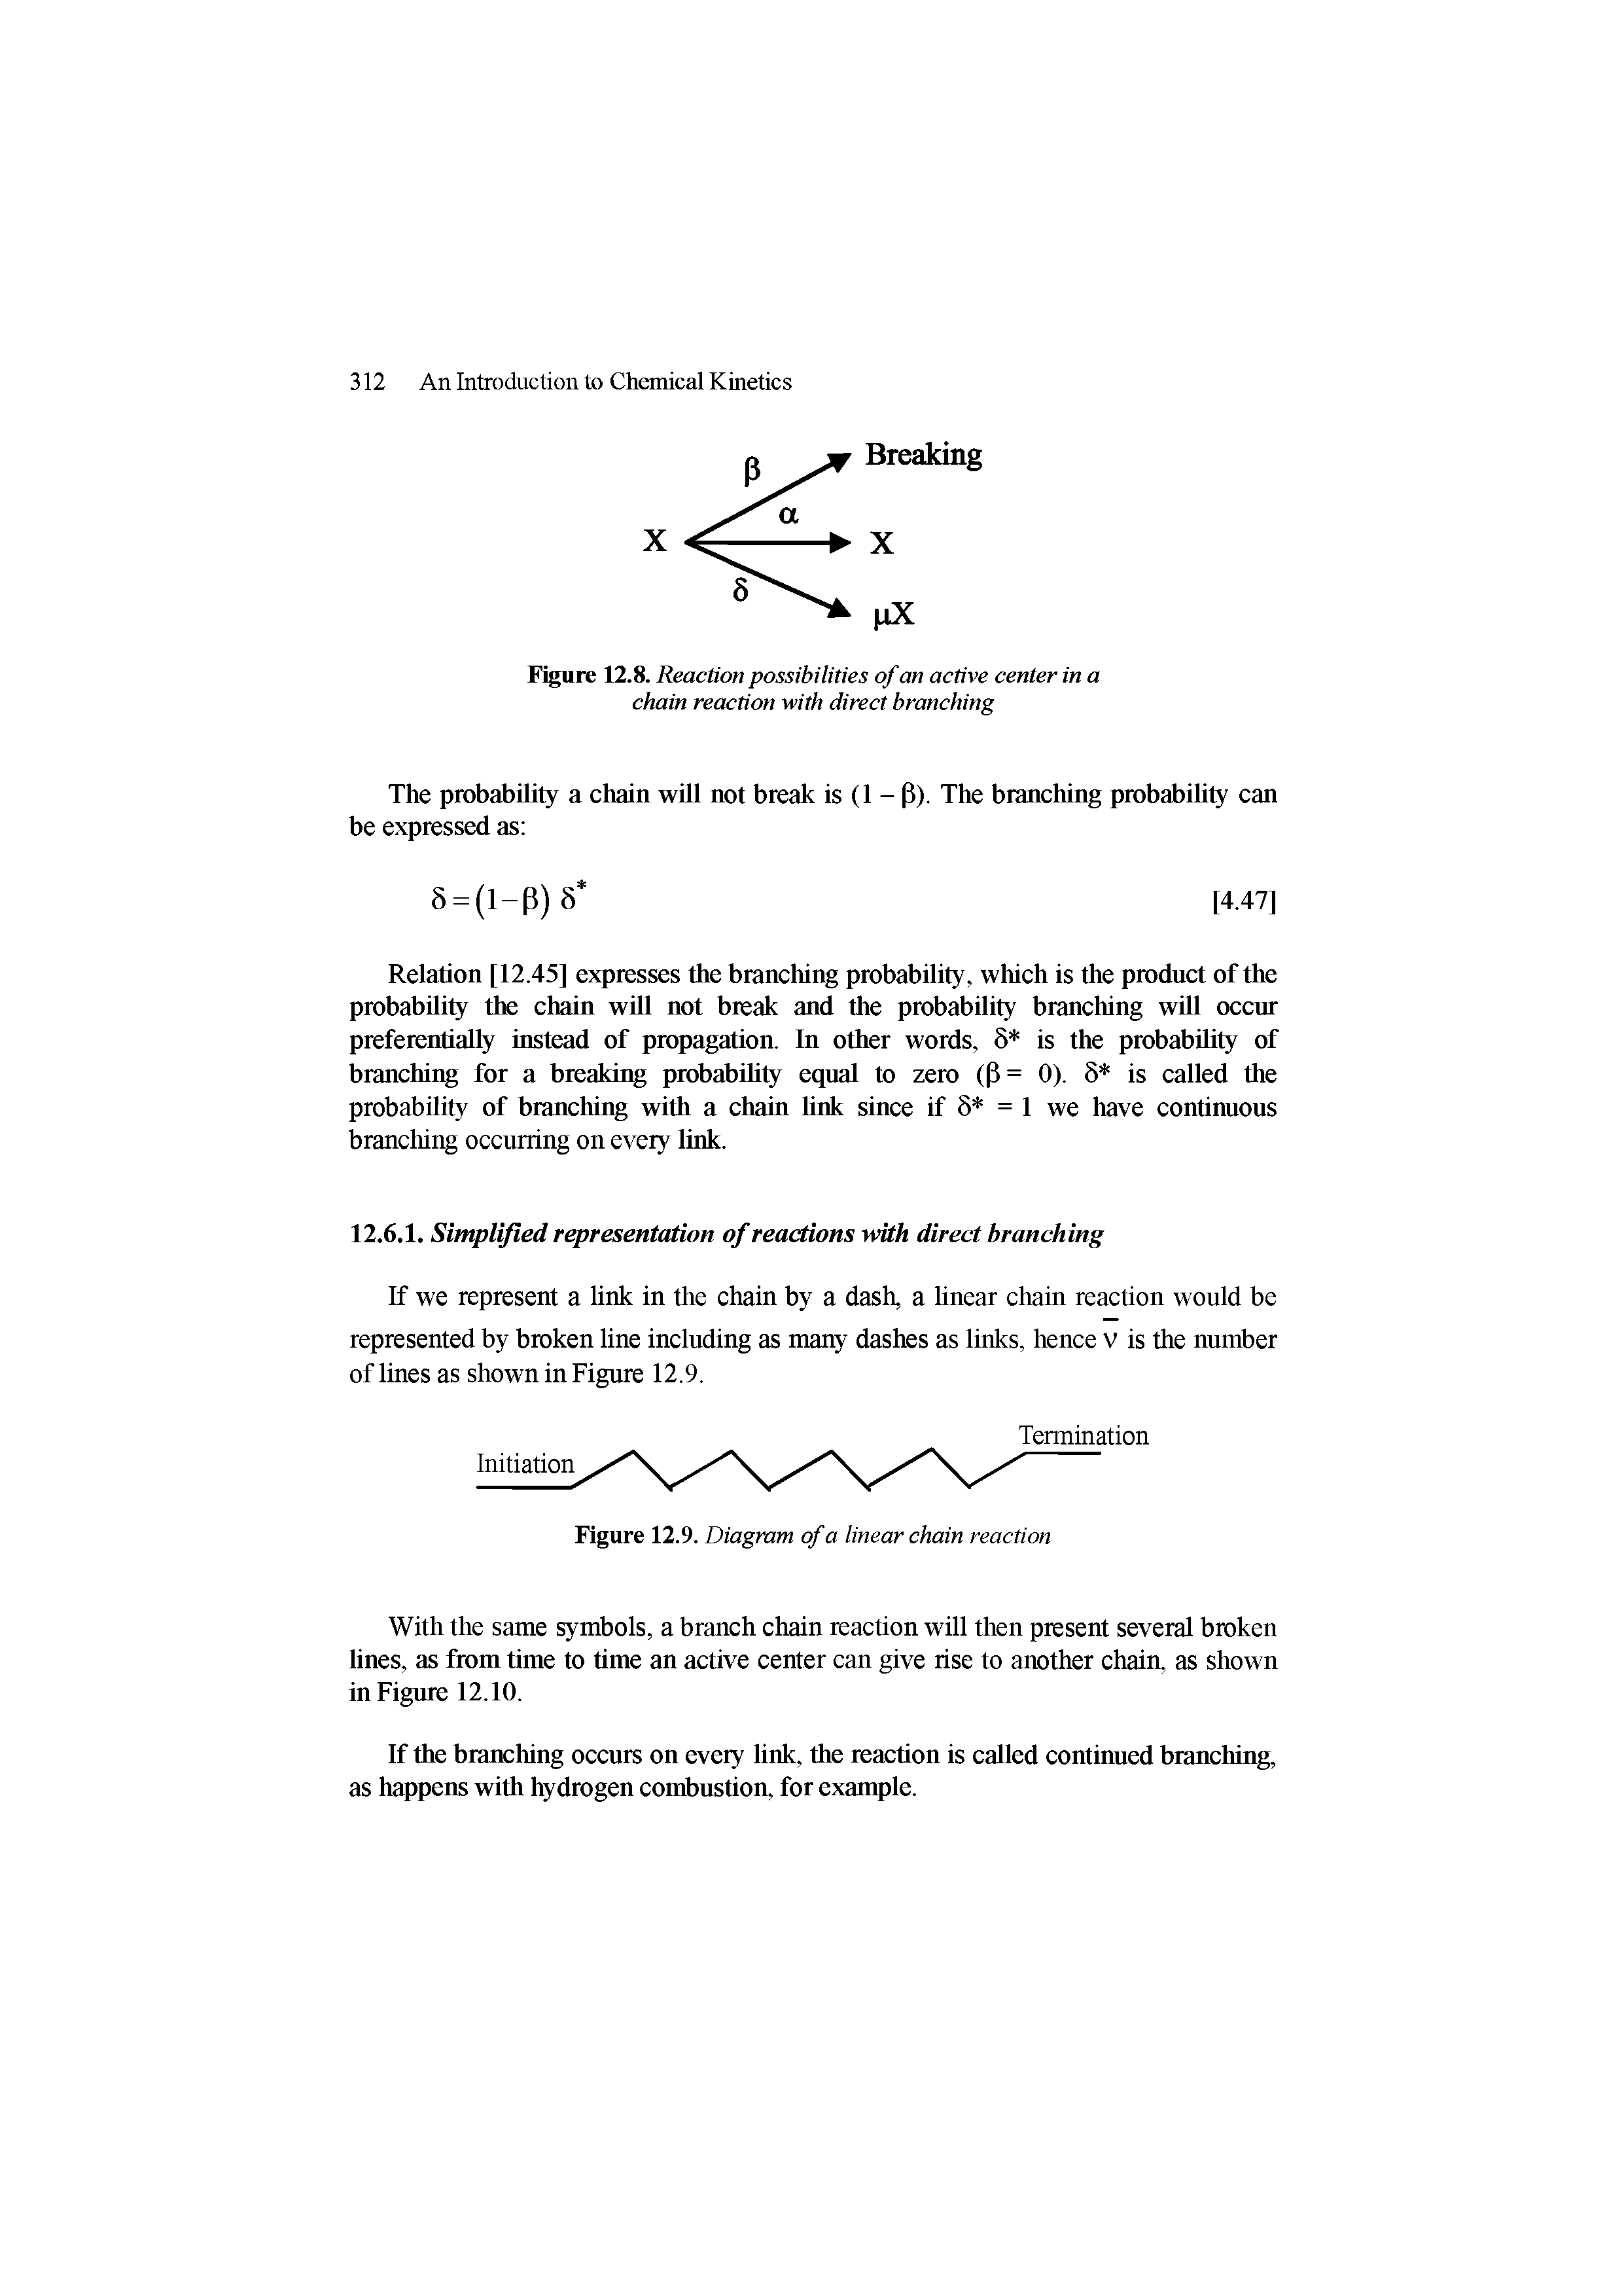 Figure 12.8. Reaction possibilities of an active center in a chain reaction with direct branching...